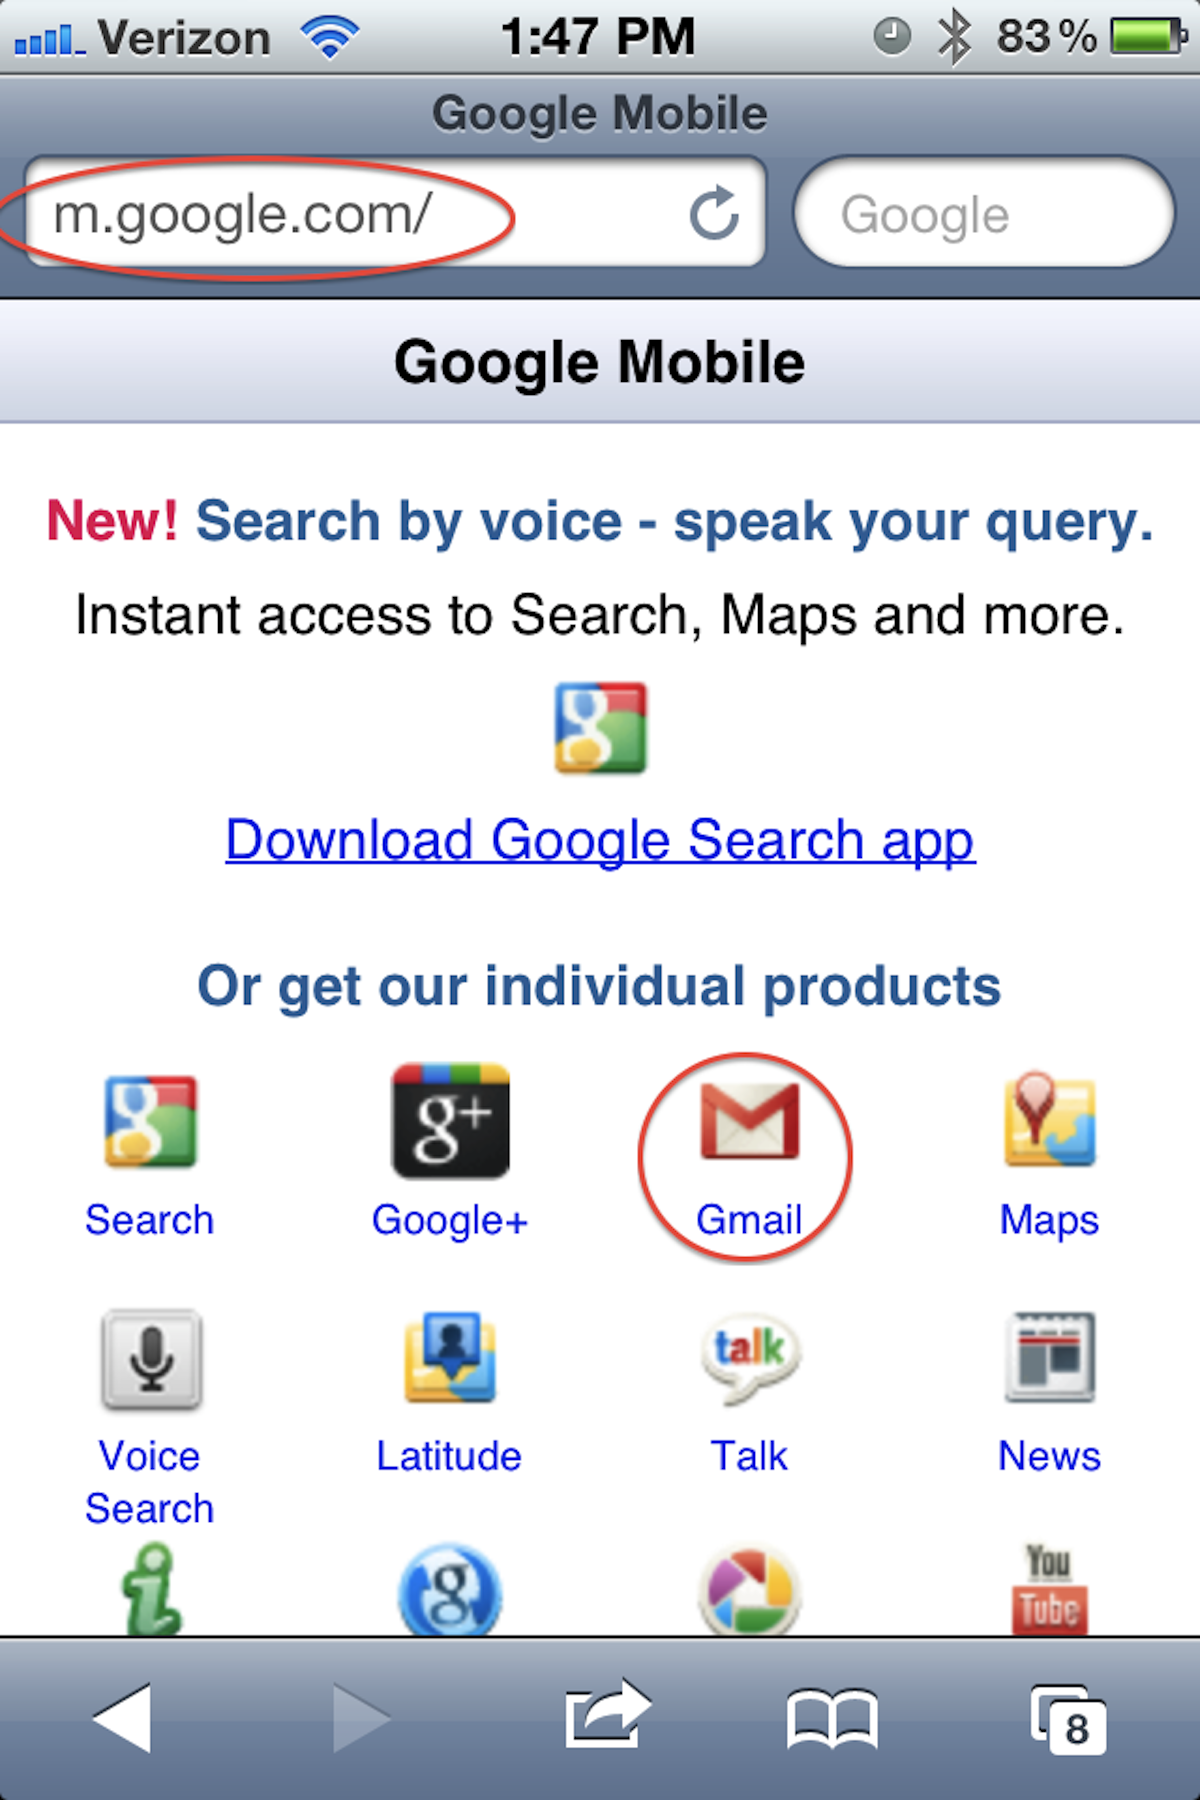  How To Setup an Away Message on Your iPhone for Gmail